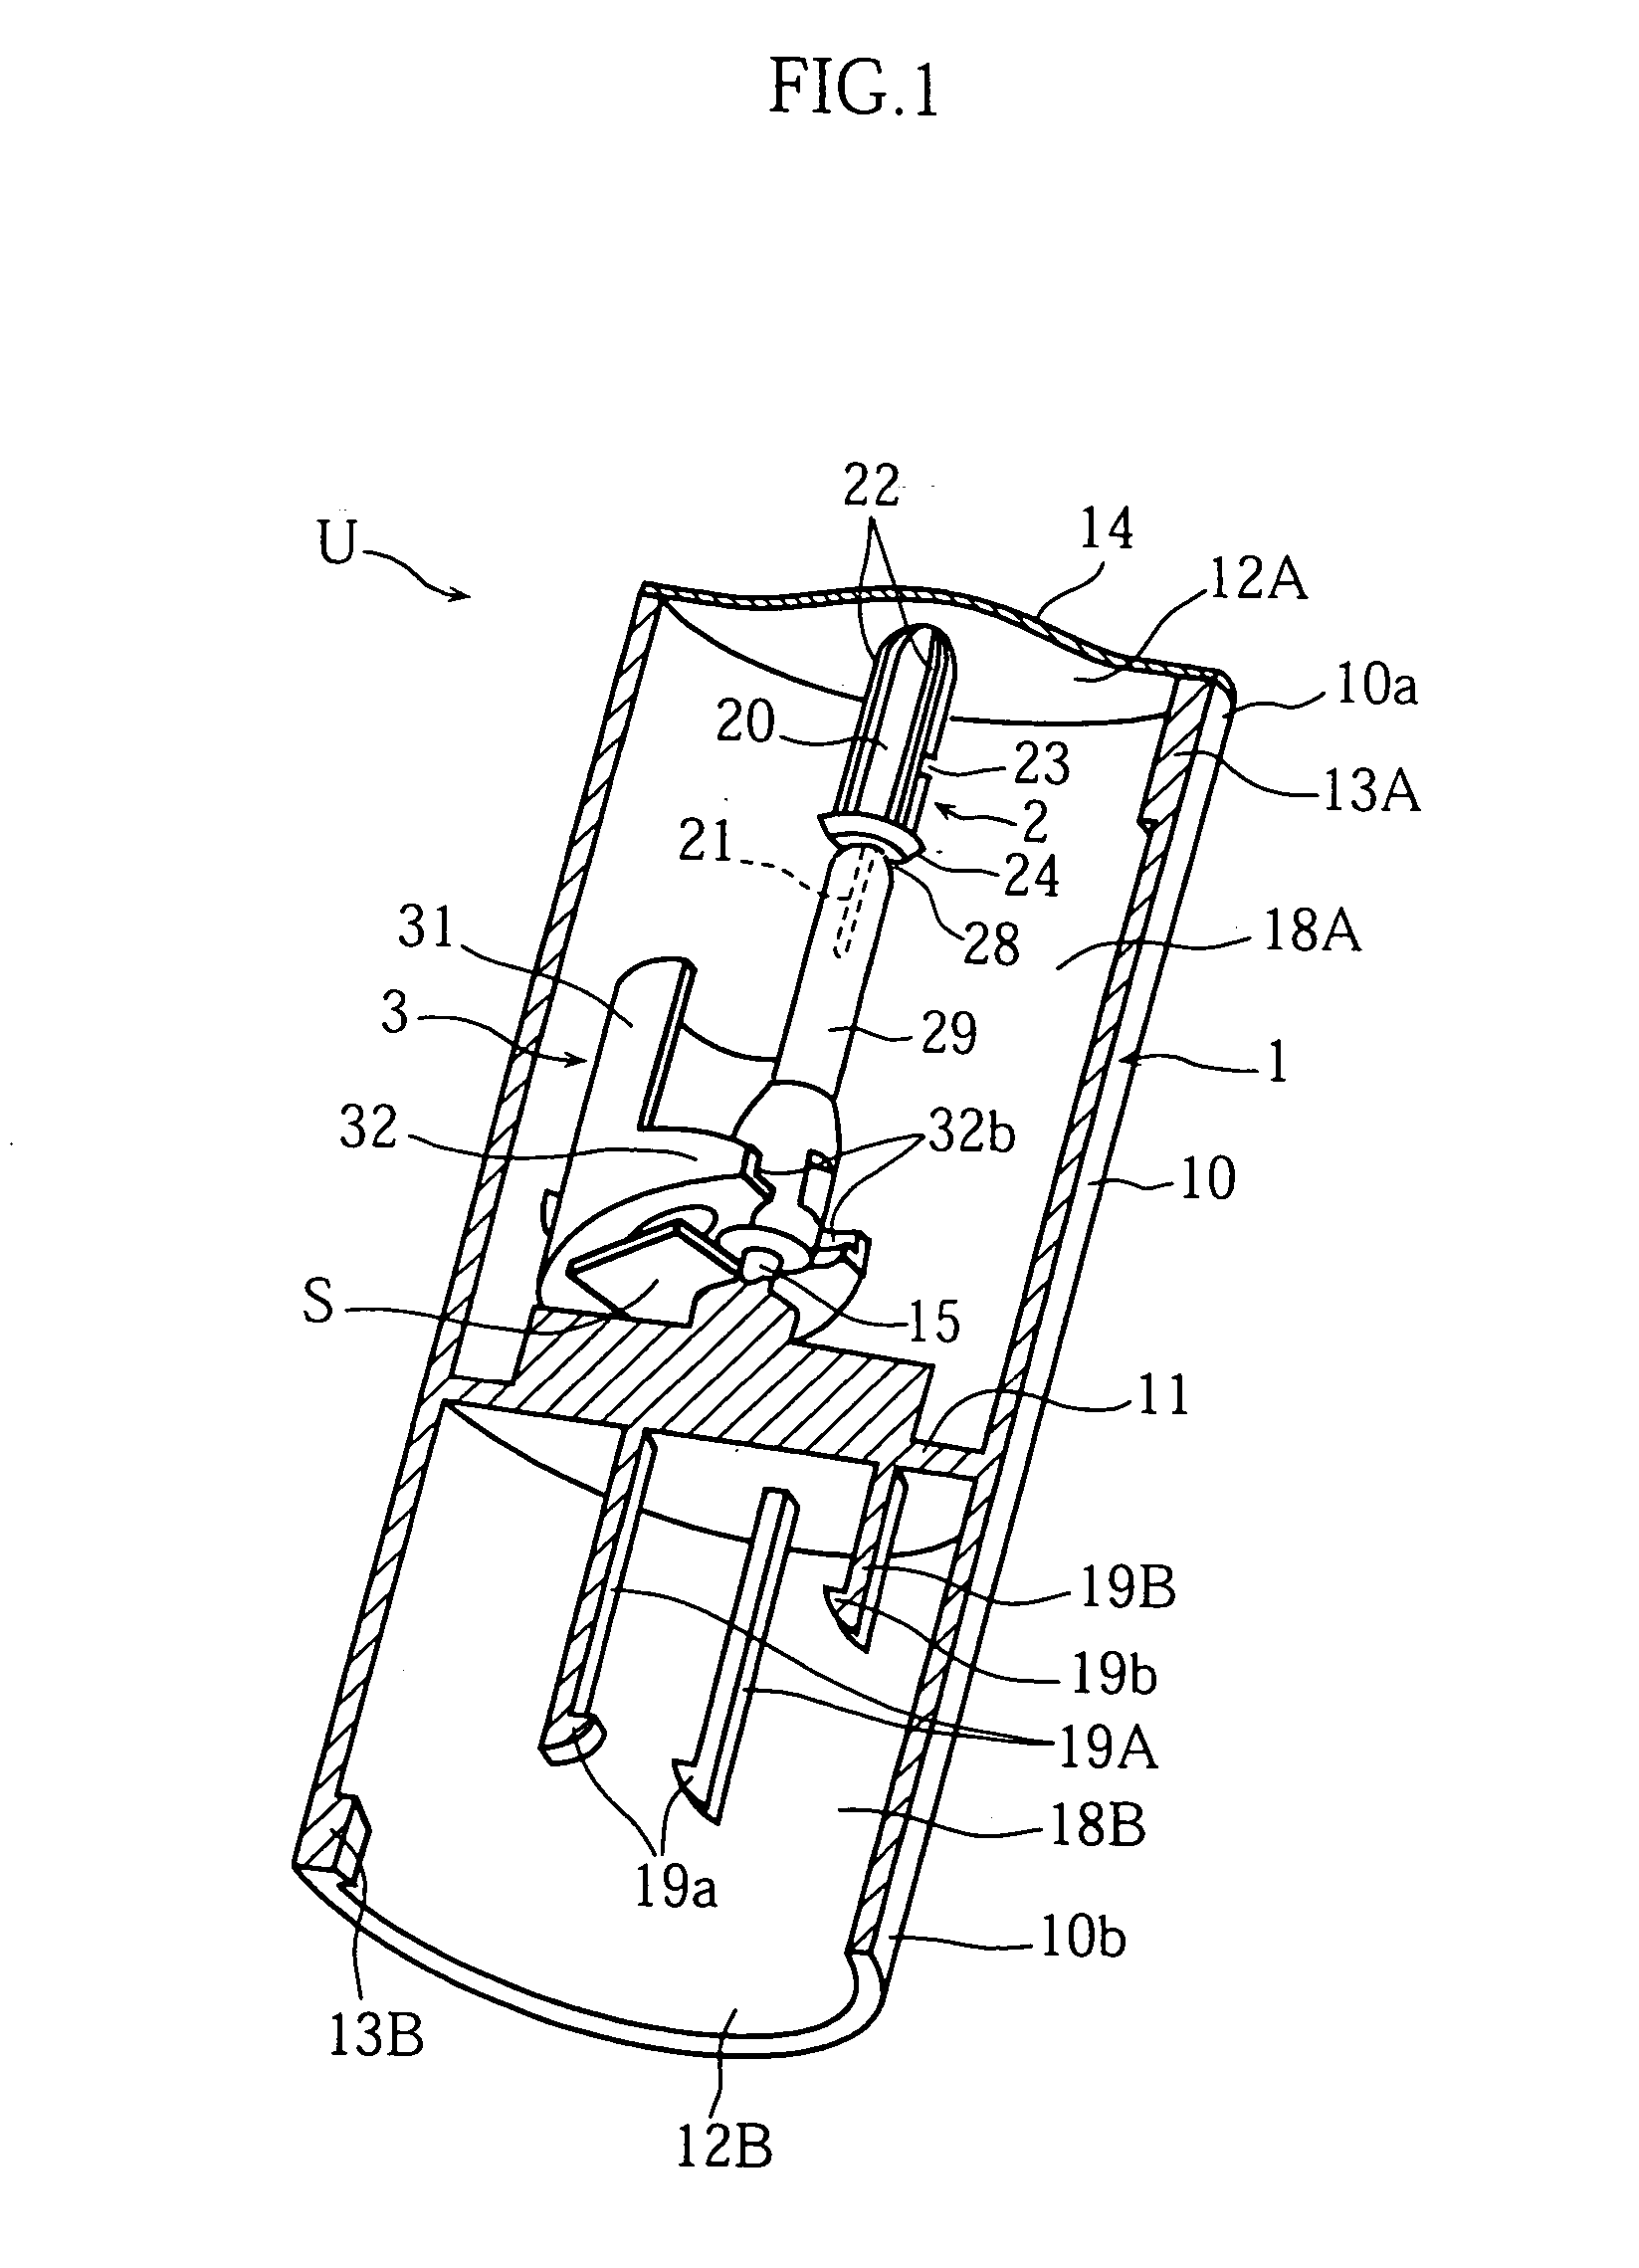 Piercing unit, piercing member removal device, and piercing device